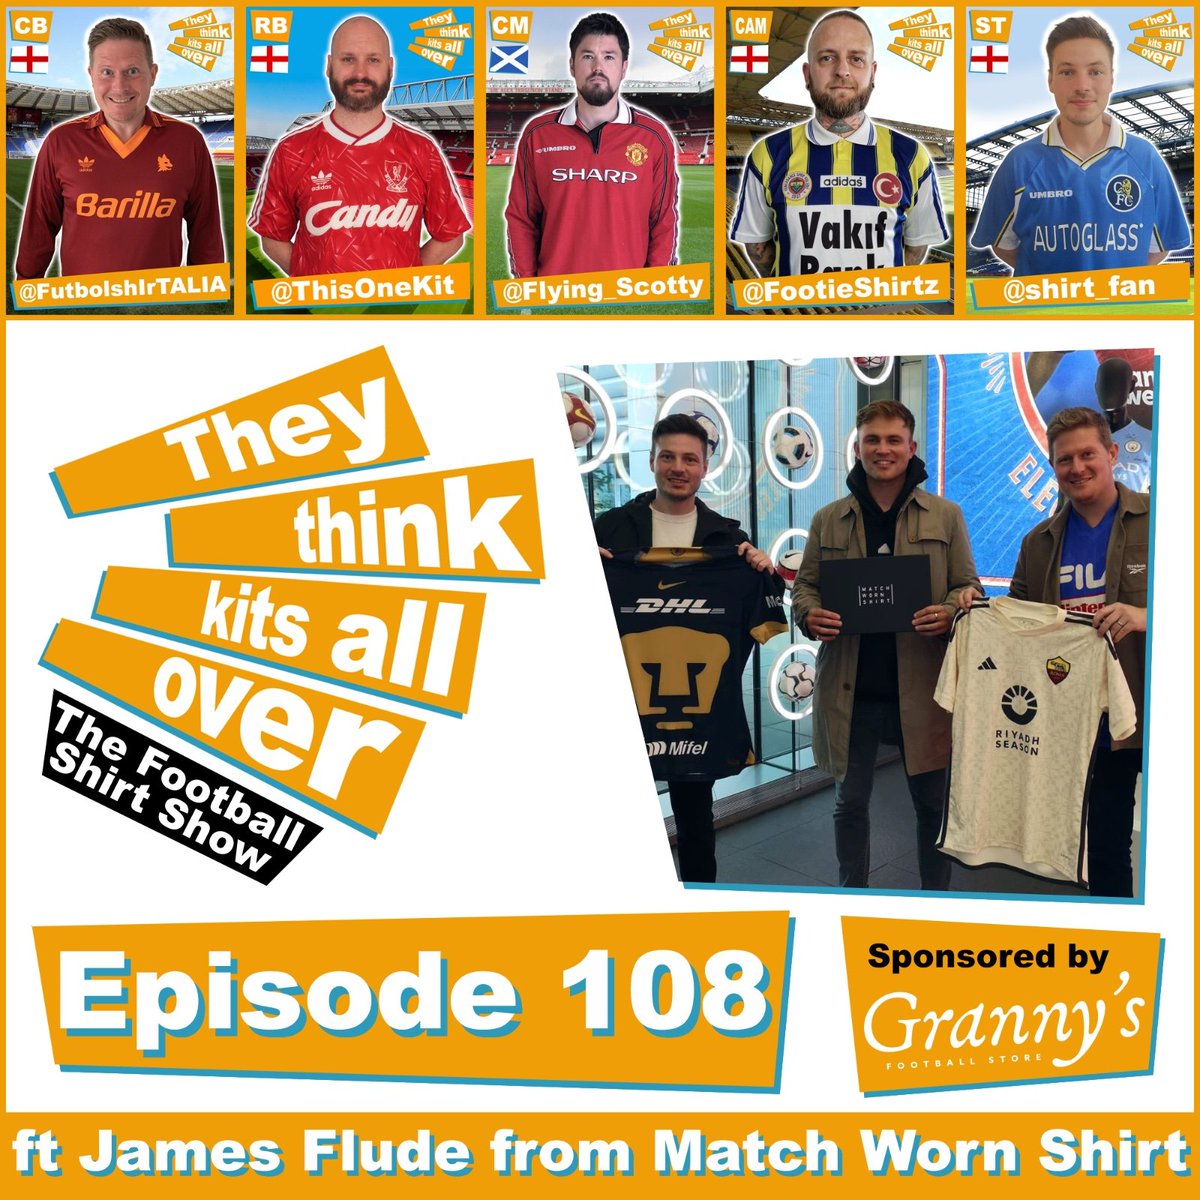 🎧 Episode 108 OUT NOW 🎧 We were joined by James Flude from @MatchWornShirt! Listen here now ⬇️ ttkaopod.com